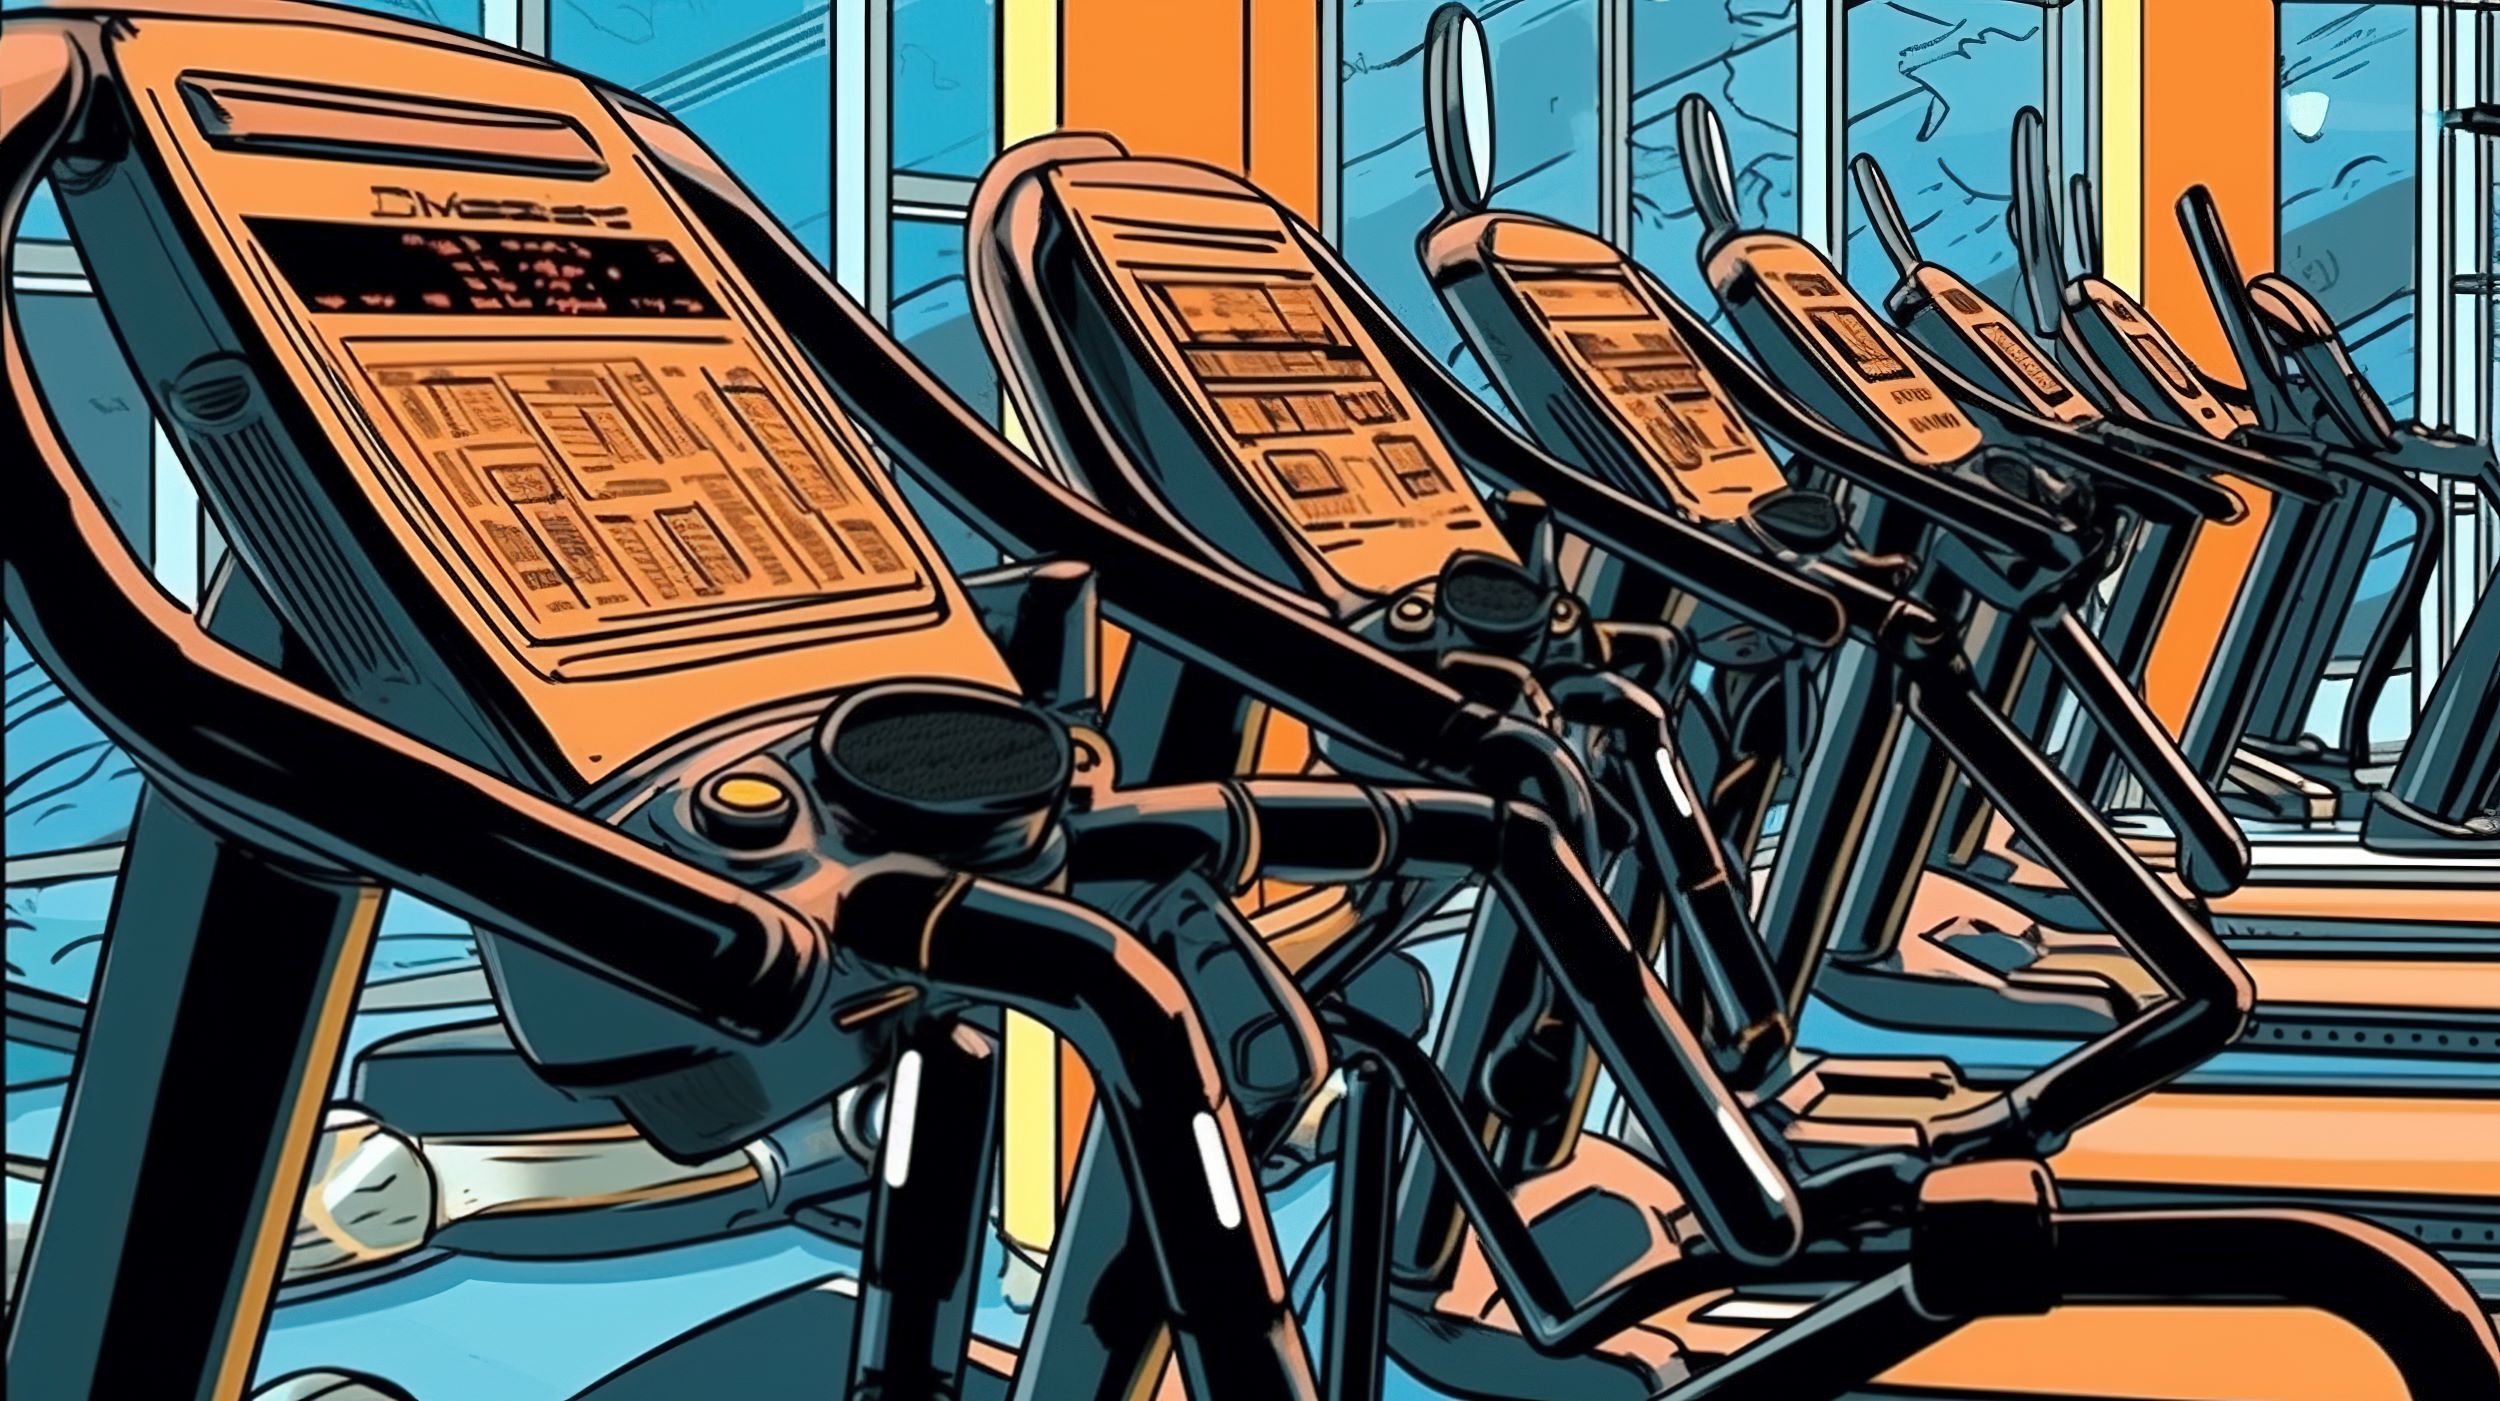 An illustration of a group of treadmills in a gym.